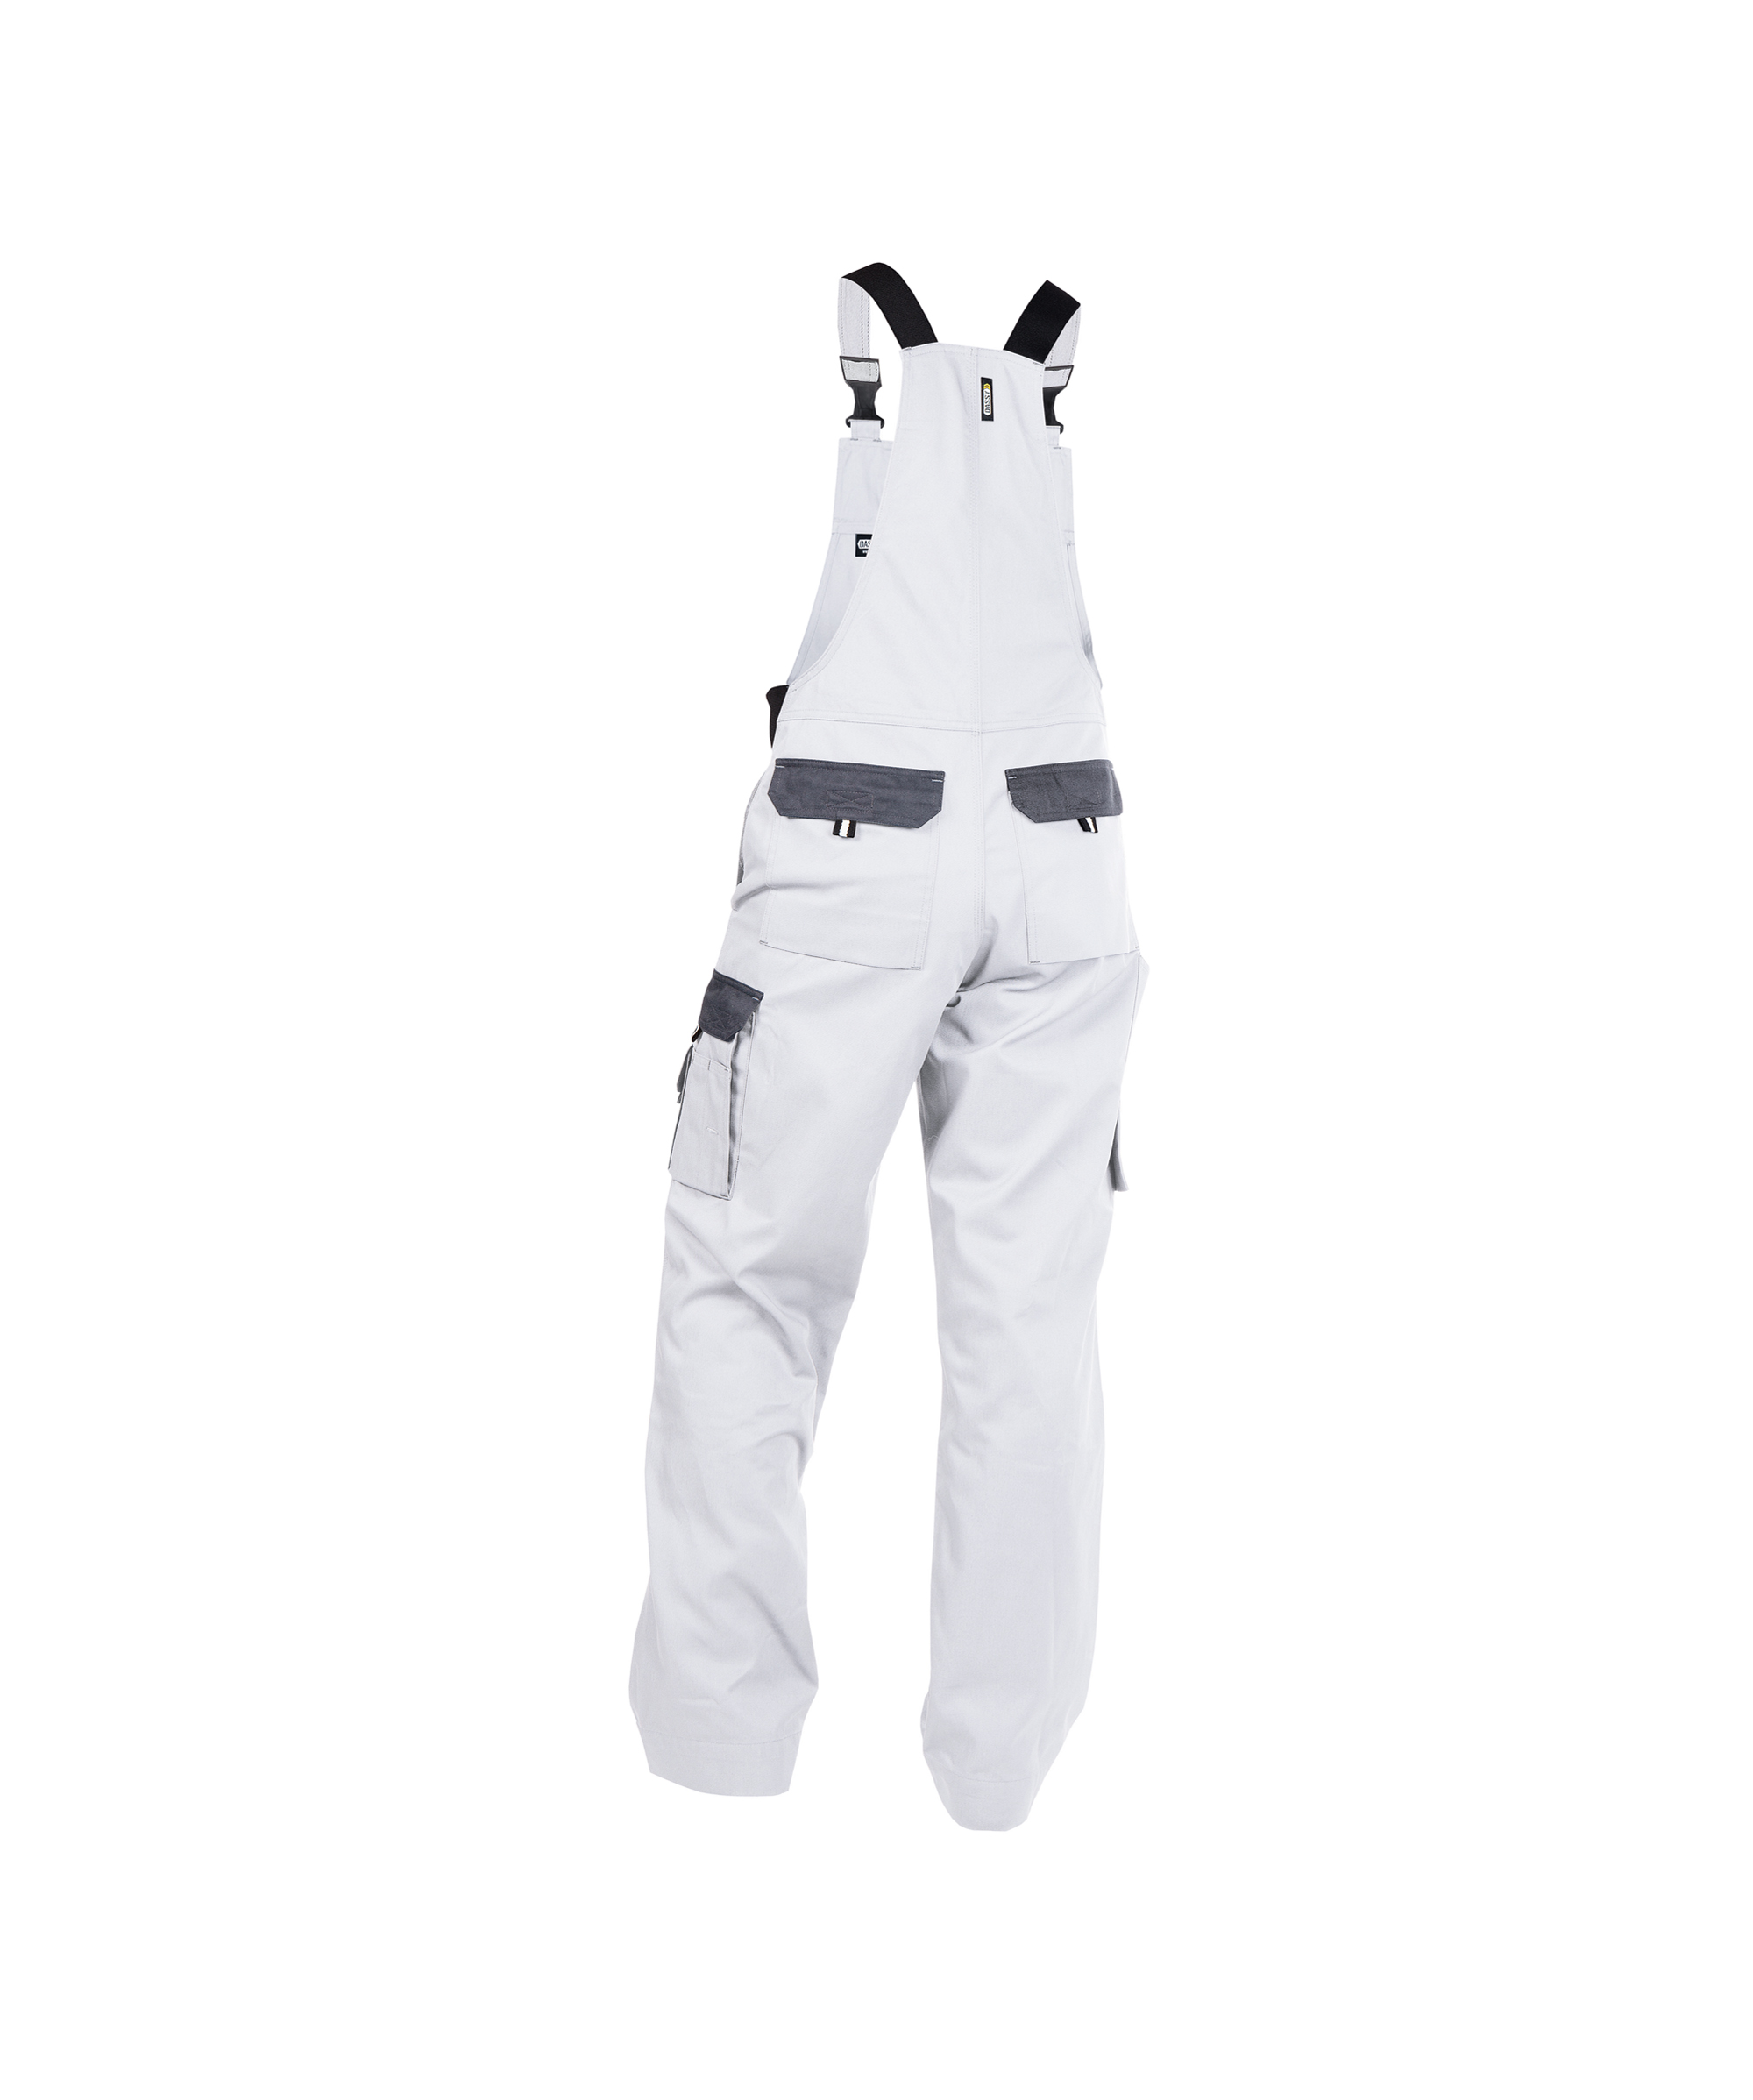 calais_two-tone-brace-overall_white-cement-grey_back.jpg